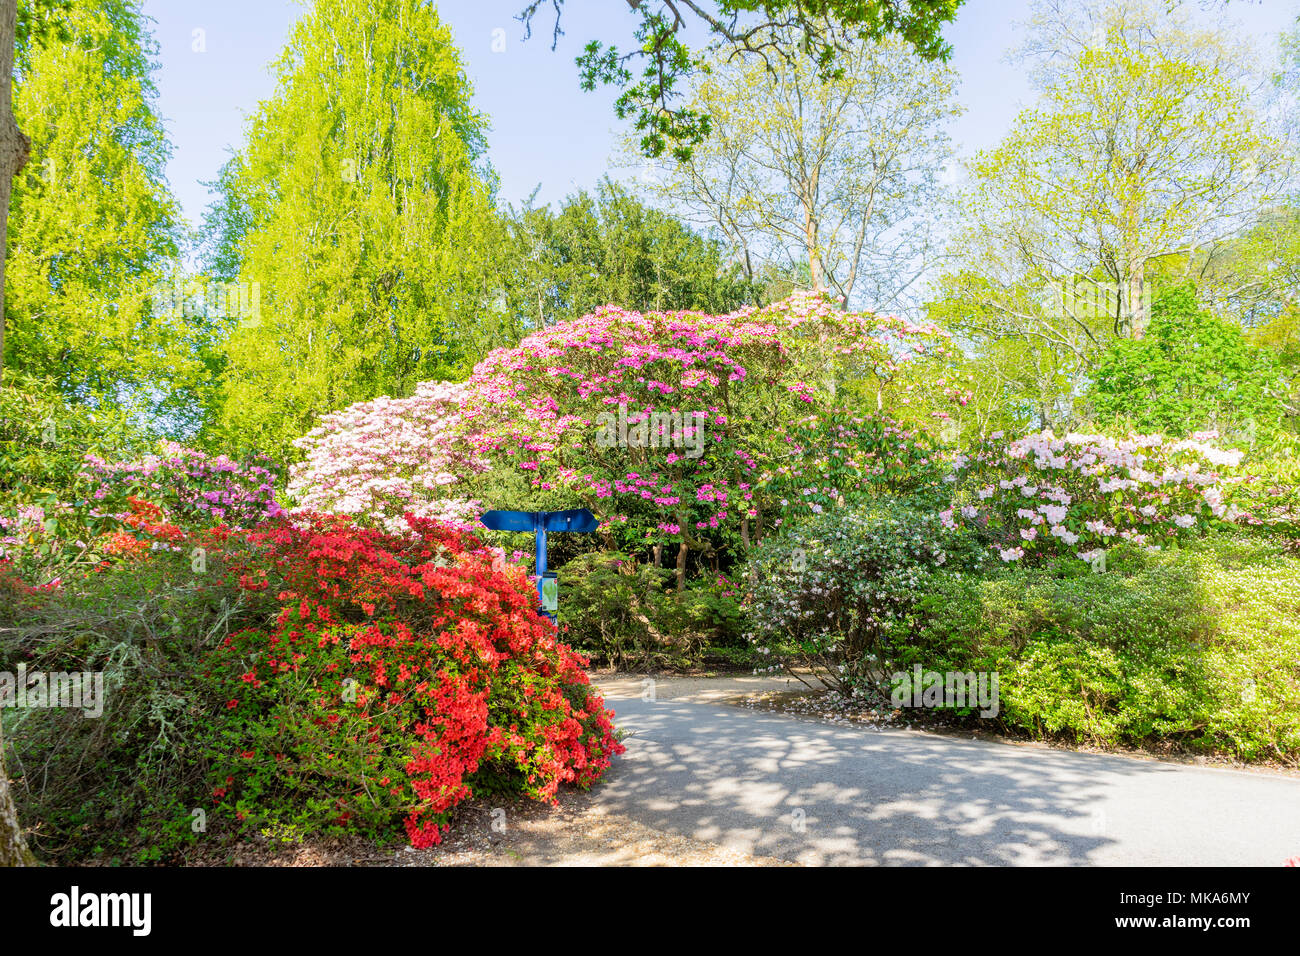 Colourful plants during spring in the grounds of Exbury gardens, a large woodland garden belonging to the Rothschild family in Hampshire, England, UKM Stock Photo